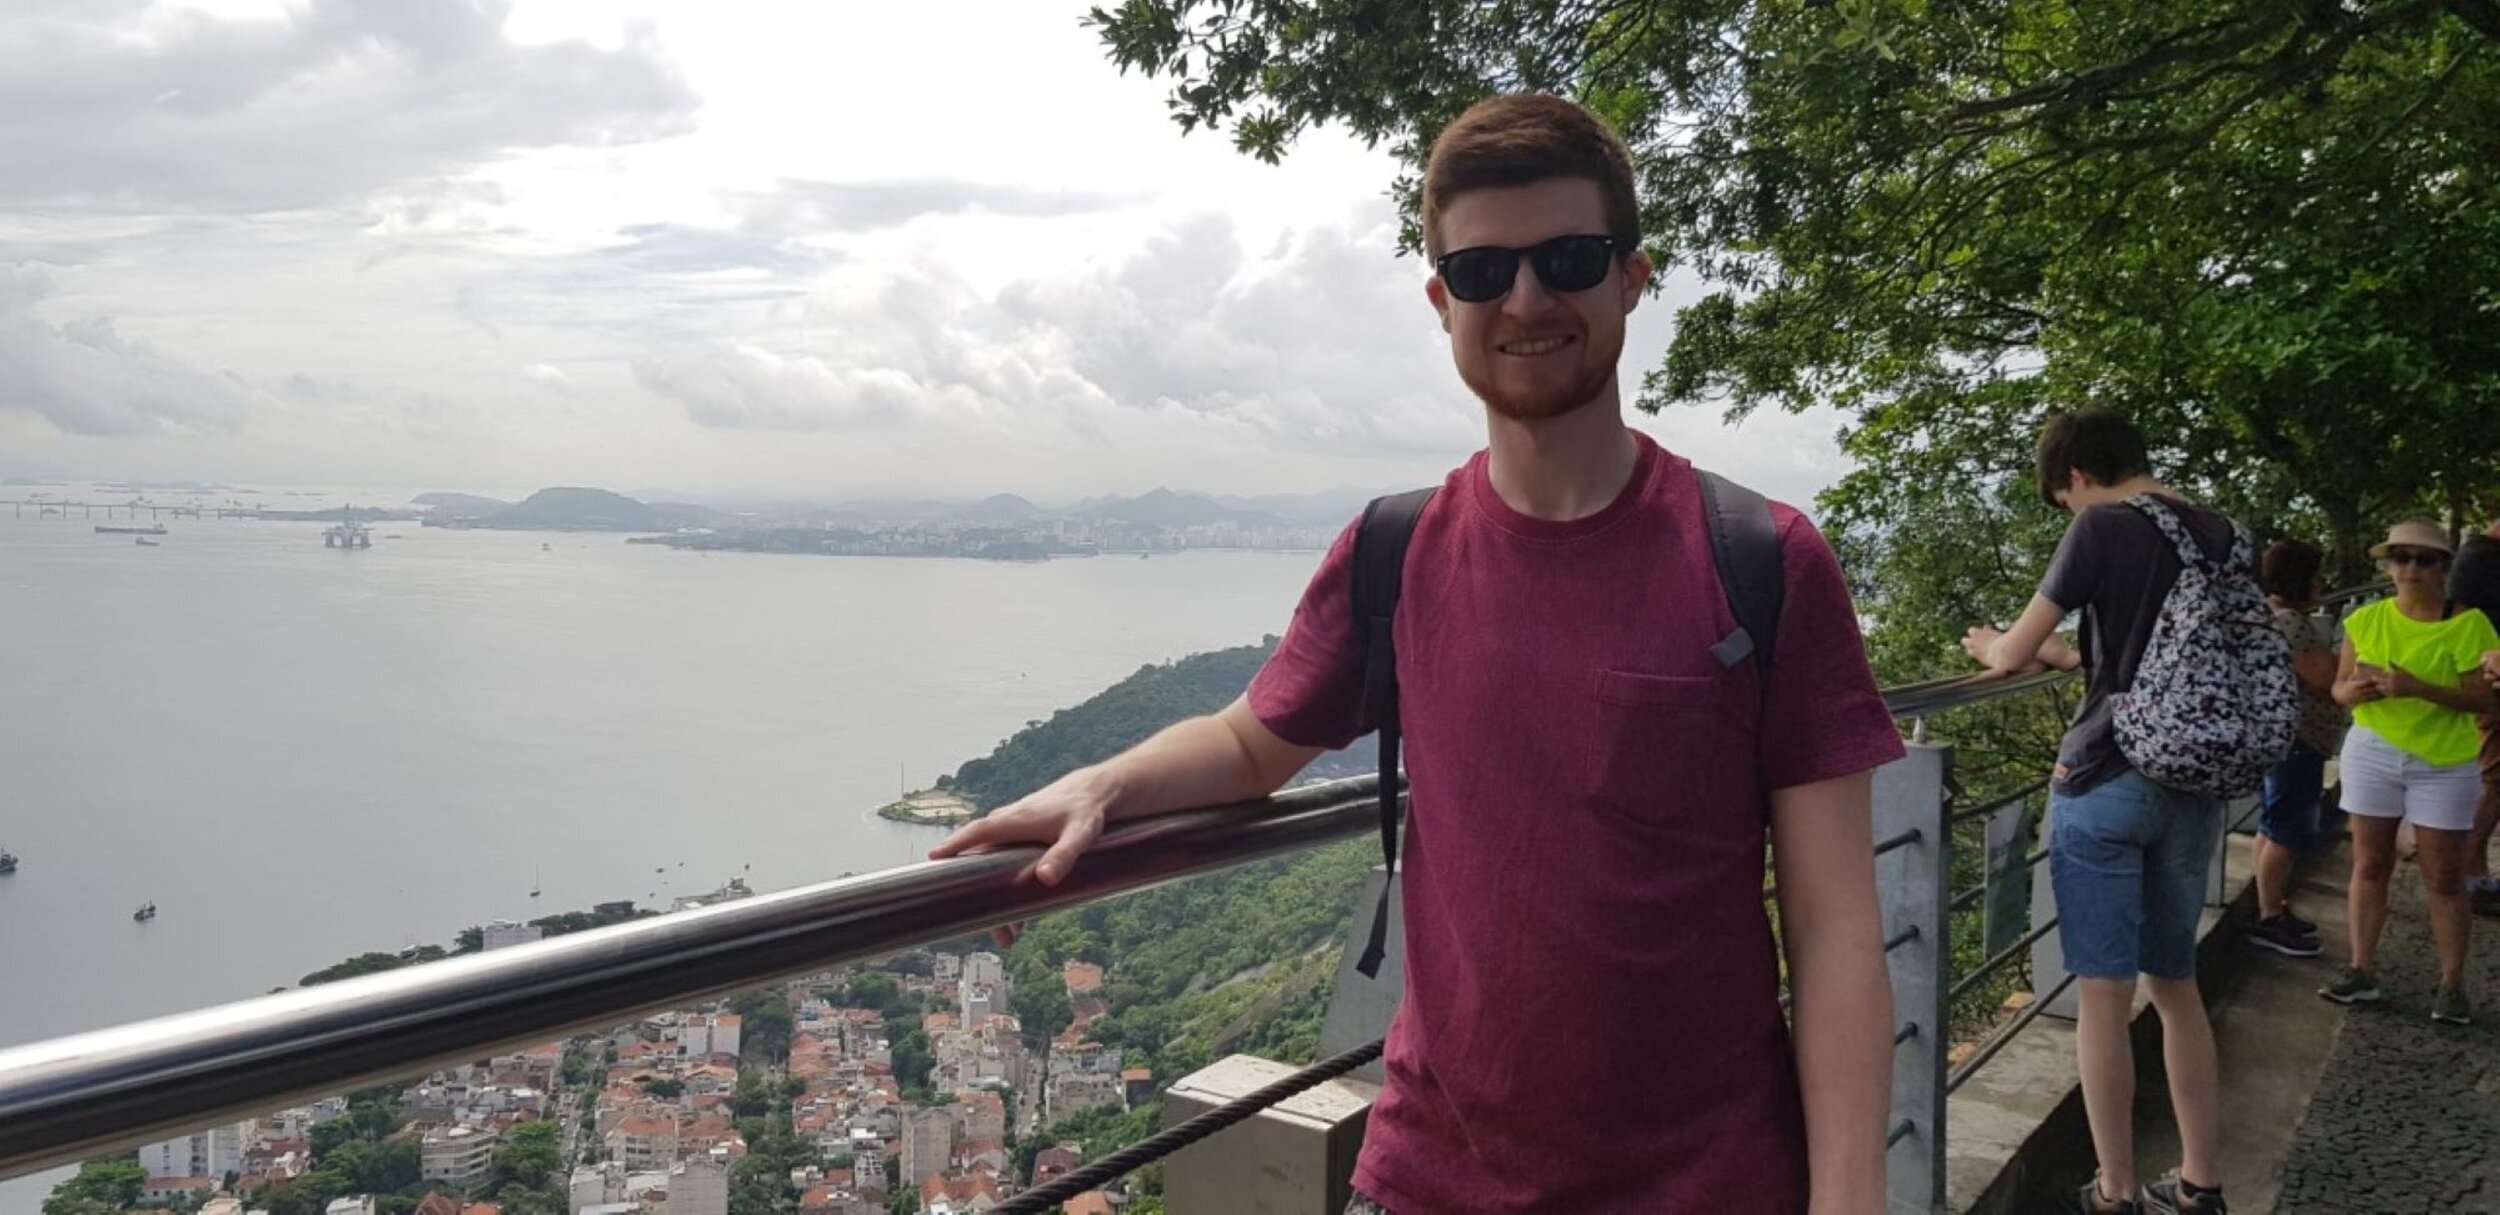 Alex travelling alone to Sugar Loaf Mountain 2019. He's standing with his arm on a glass balcony high up and a calm sea glistens in the background. Photo: Alex Waite